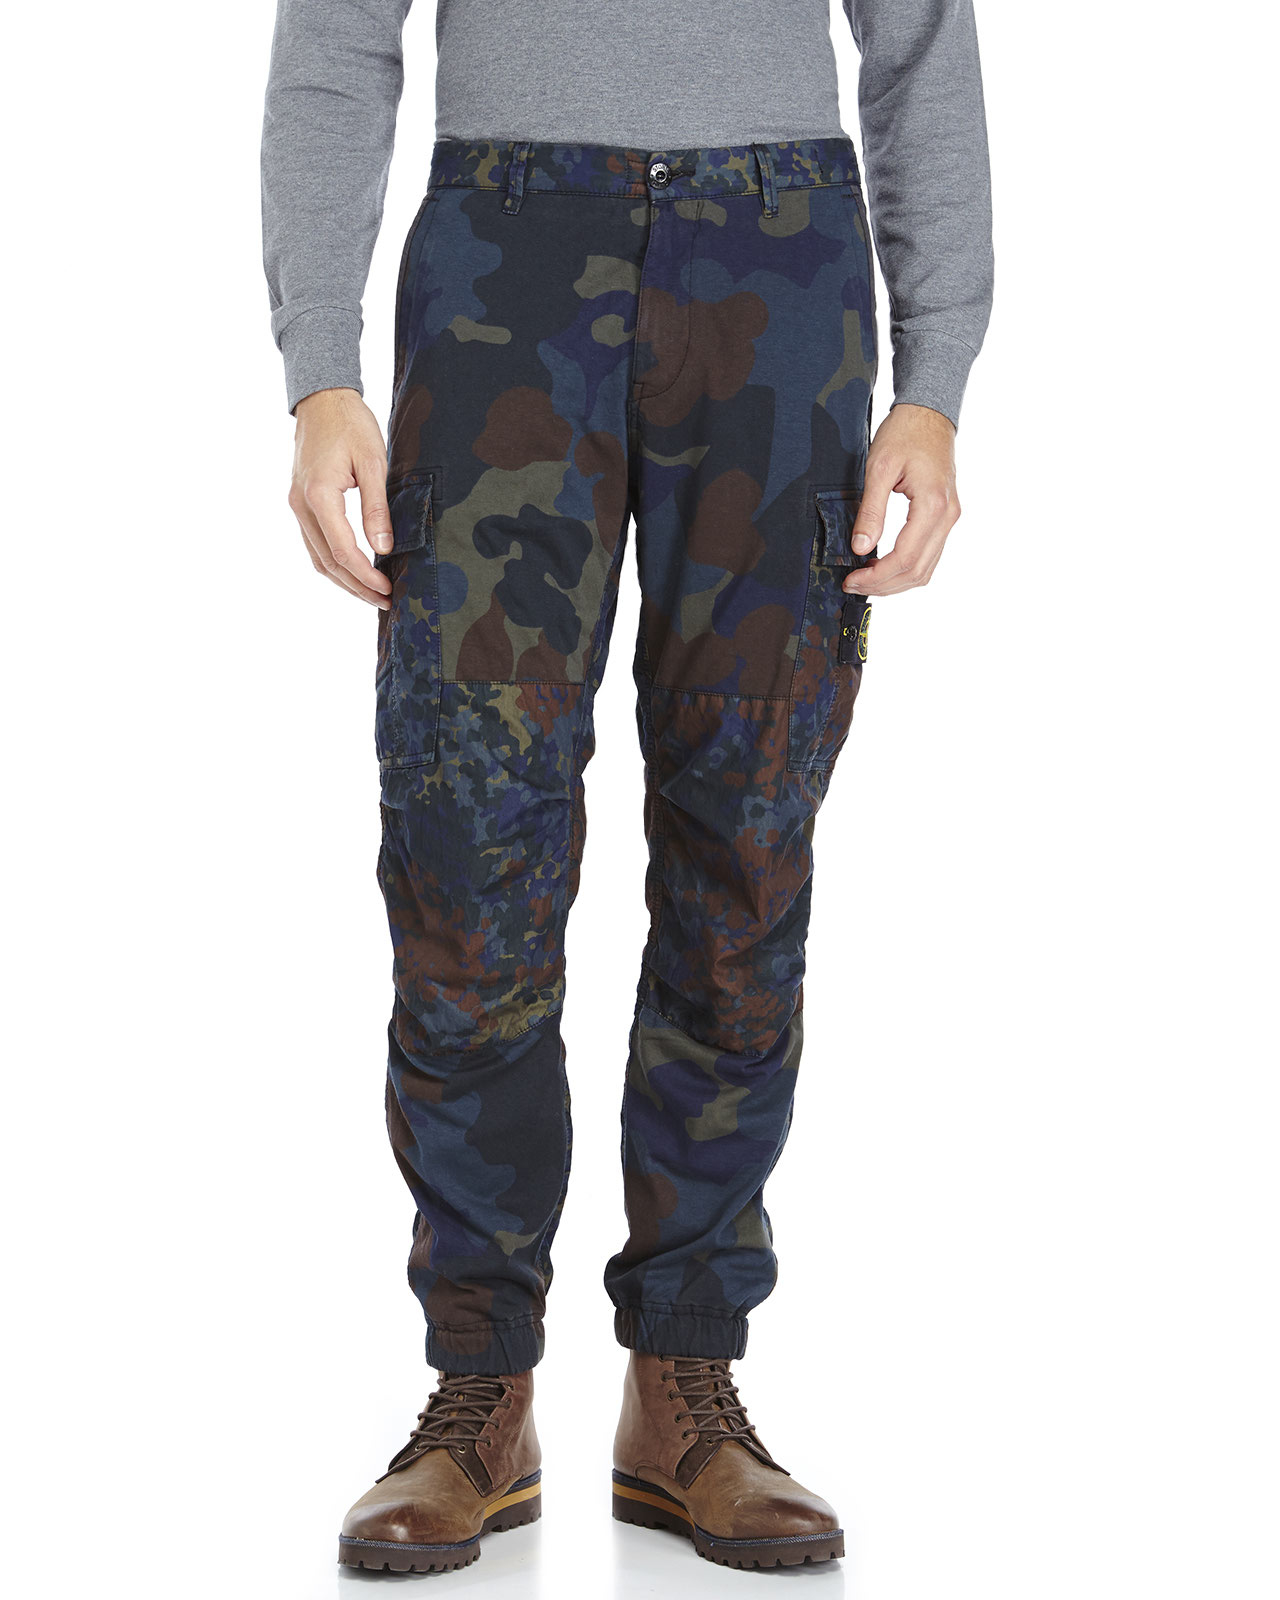 Lyst - Stone Island Camouflage Print Cargo Pants in Blue for Men